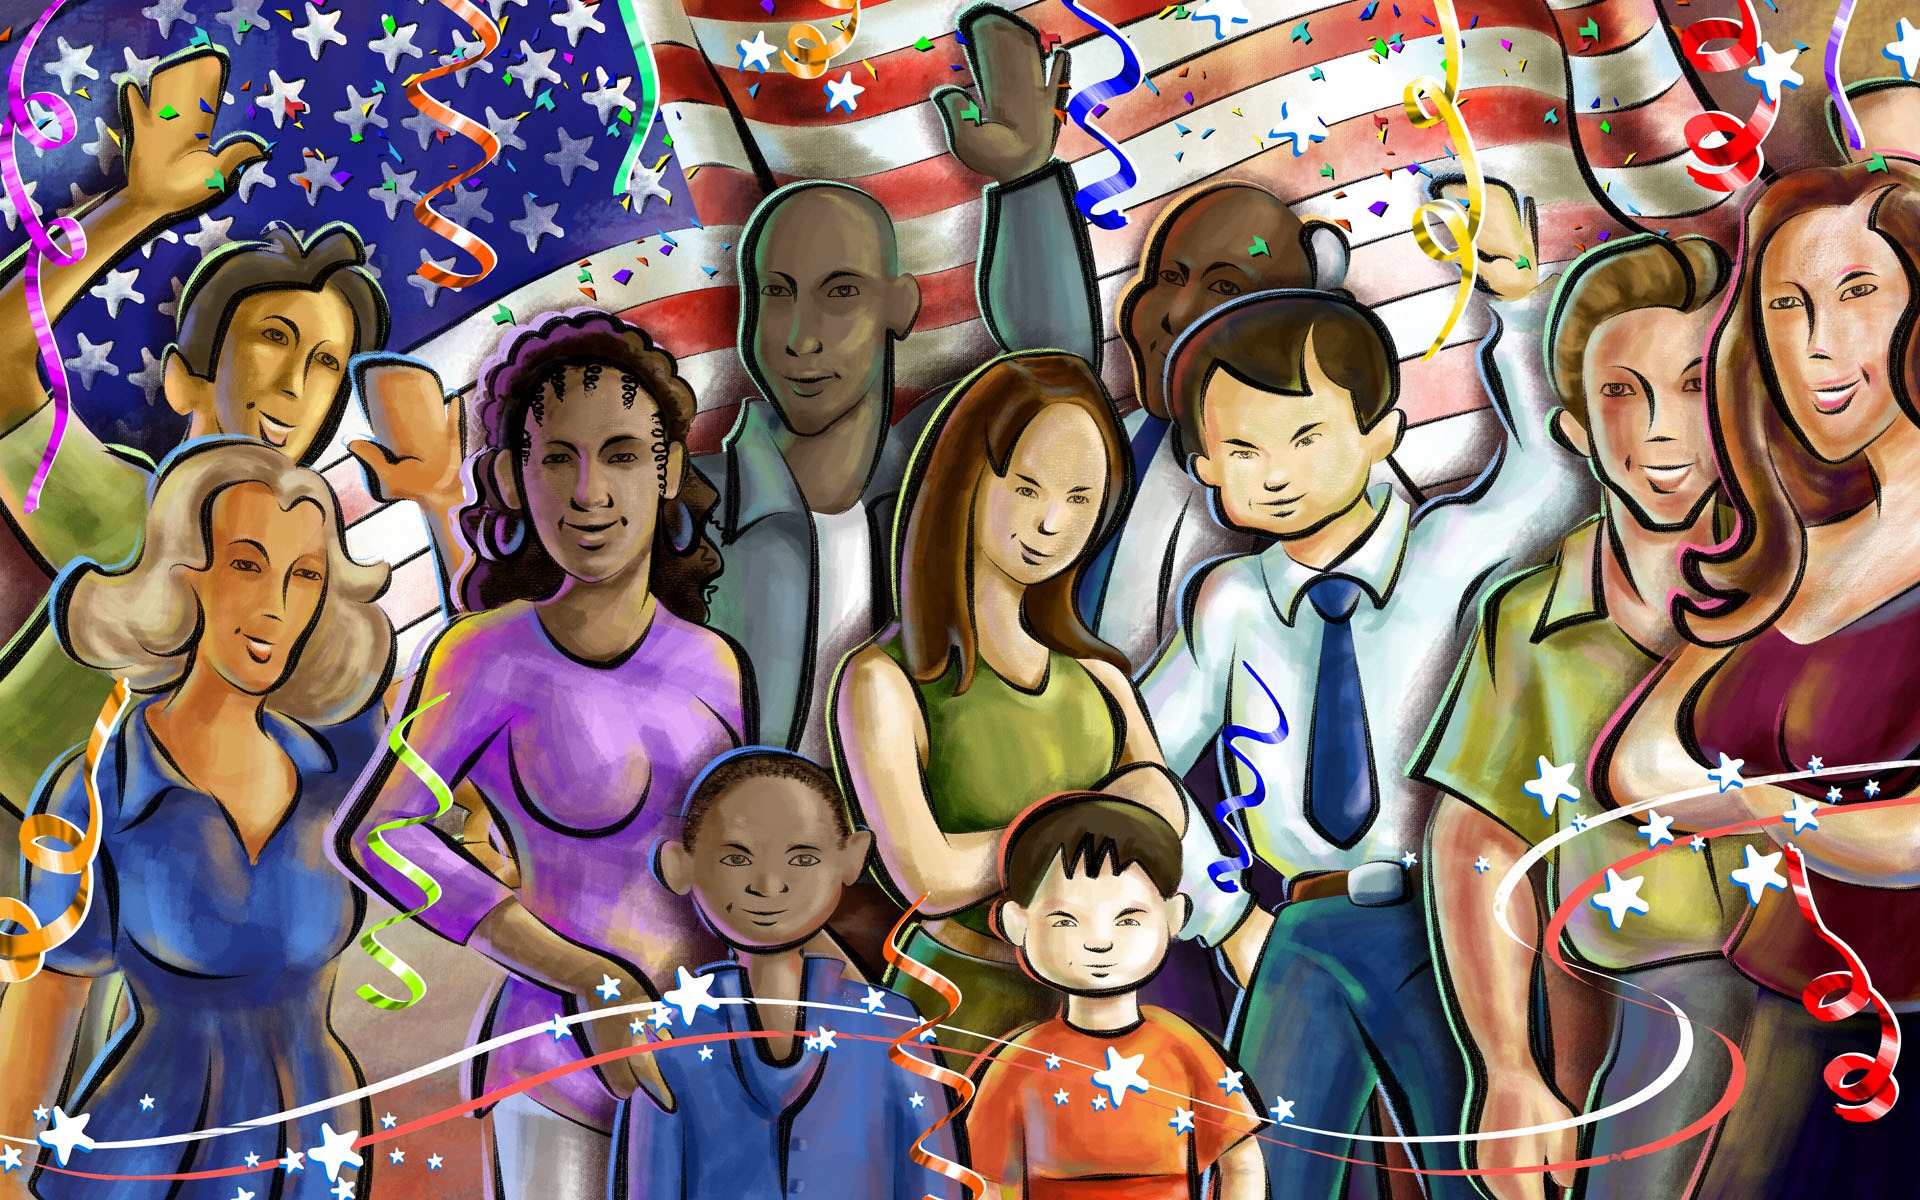 U.S. Independence Day theme wallpaper #40 - 1920x1200